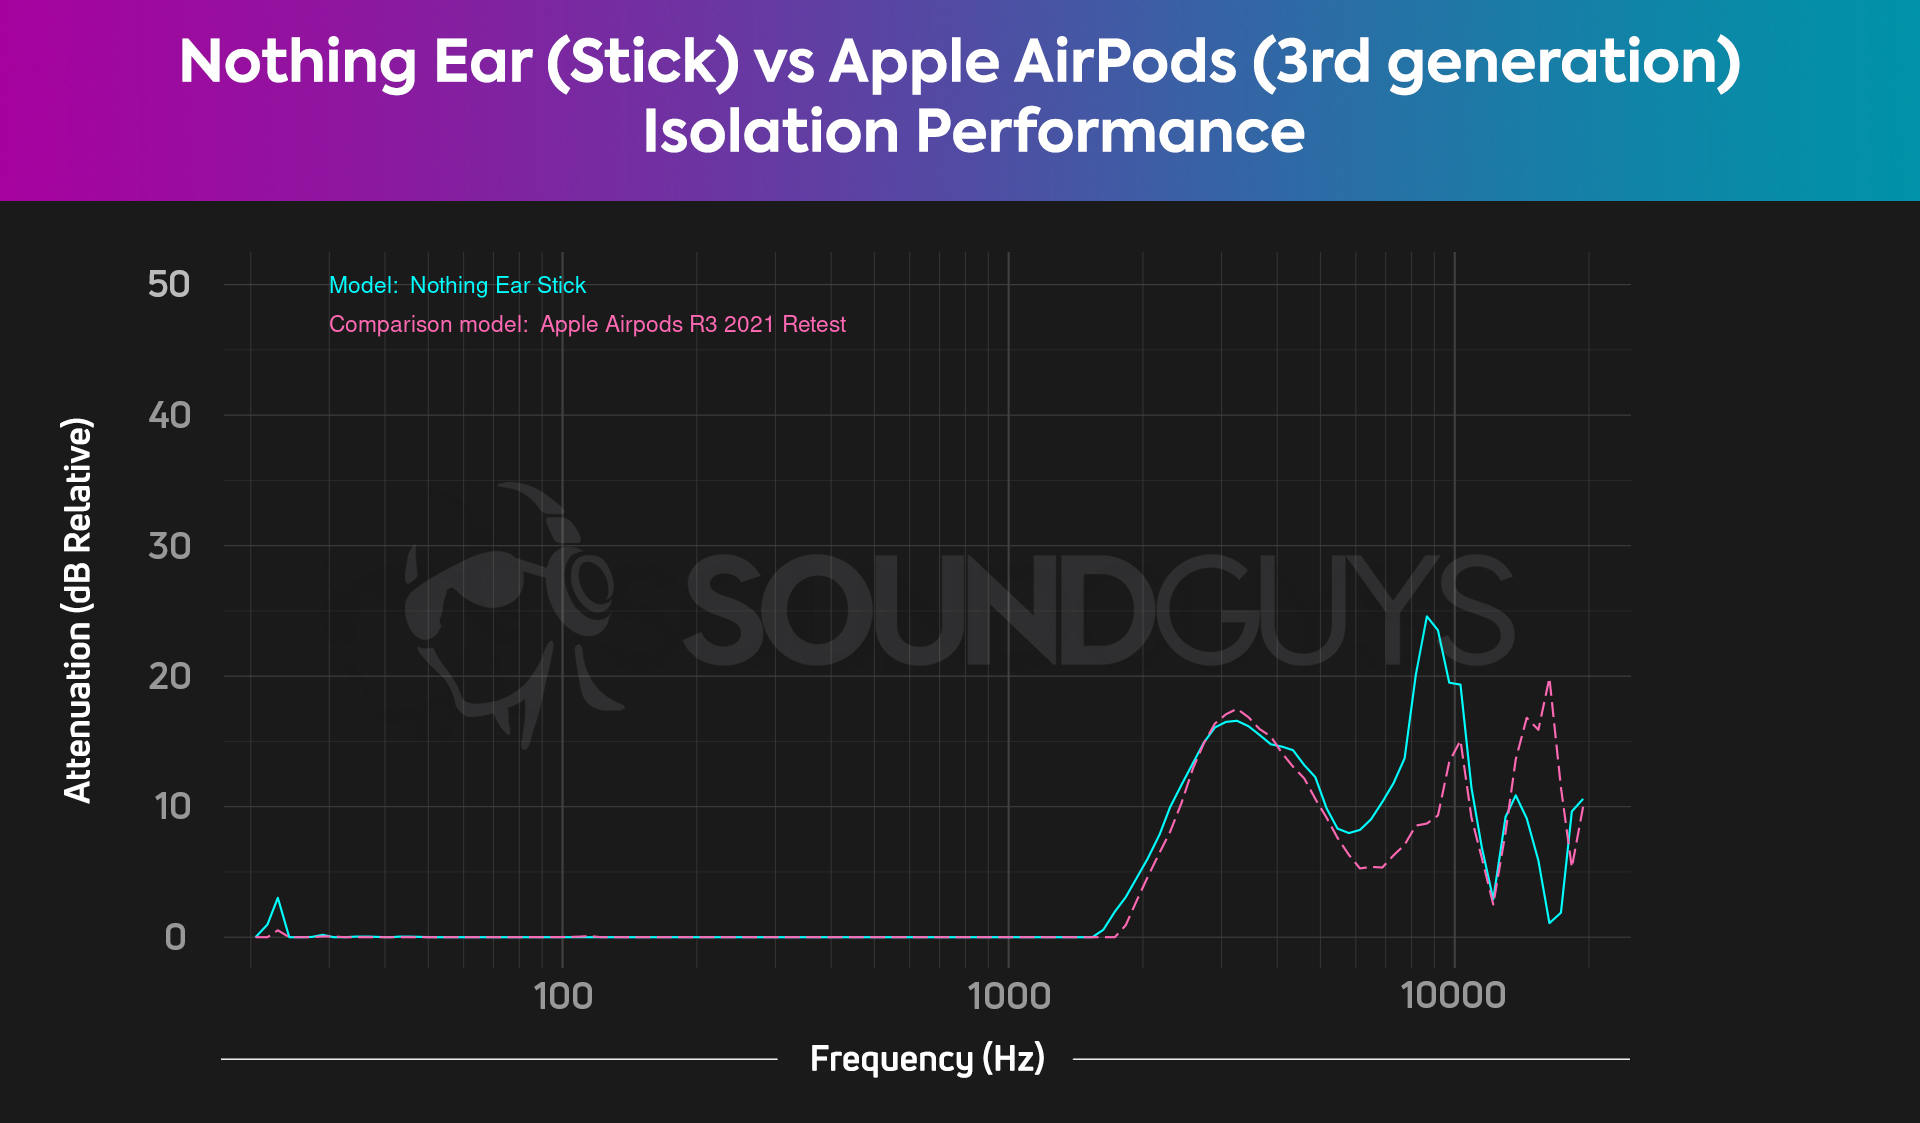 A chart comparing the noise isolation performance of the Nothing Ear (Sticks) to the Apple AirPods (3rd generation).